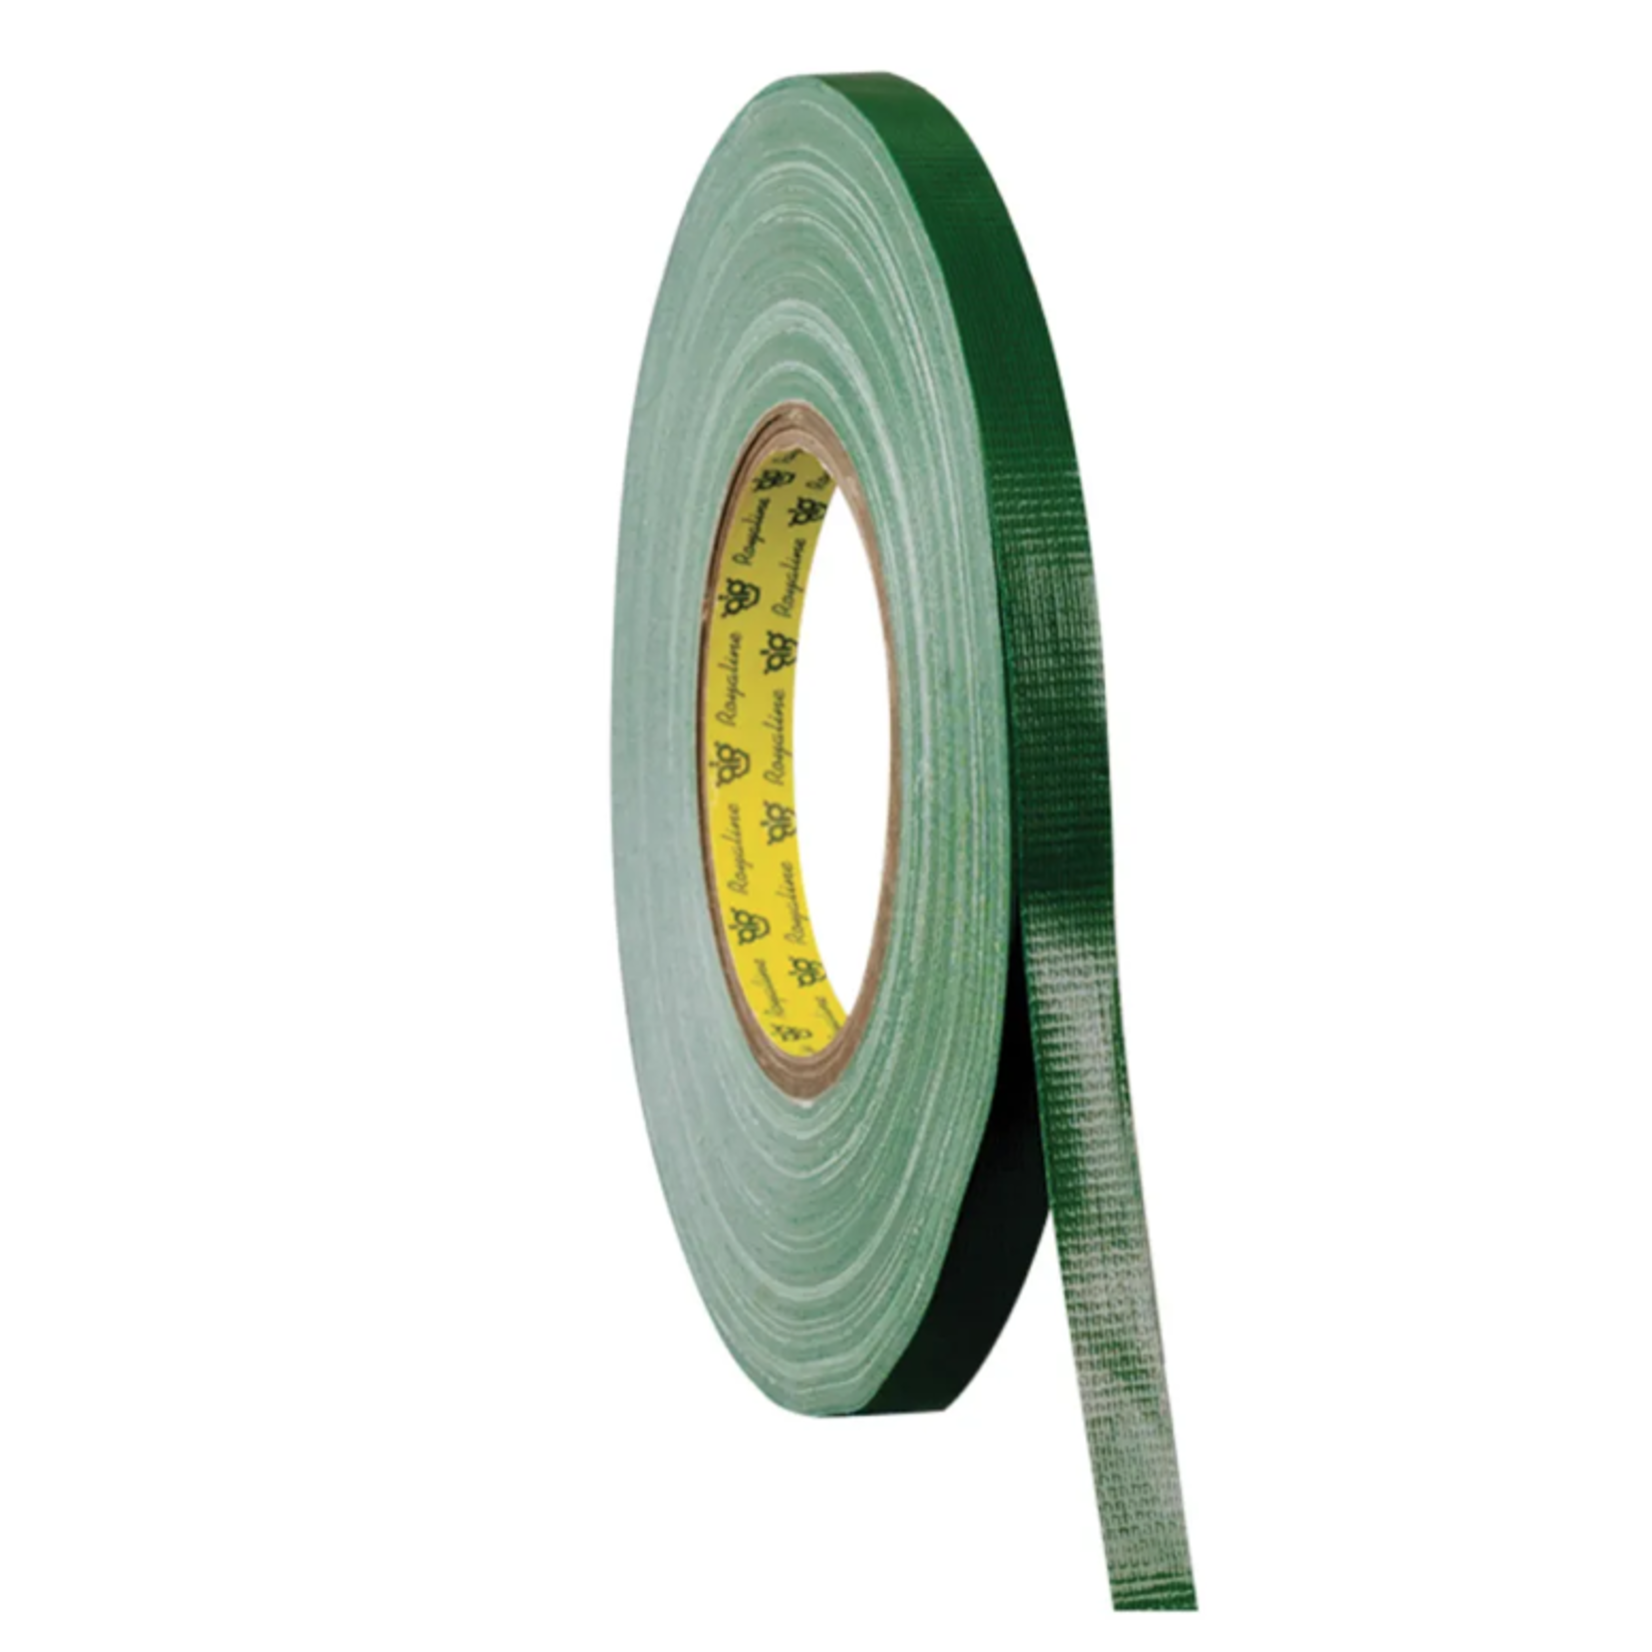 50% OFF WAS $9.99 NOW 4.99 1/2" ADHESIVE TAPE X 60 YDS ROYAL WATERPROOF TAPE